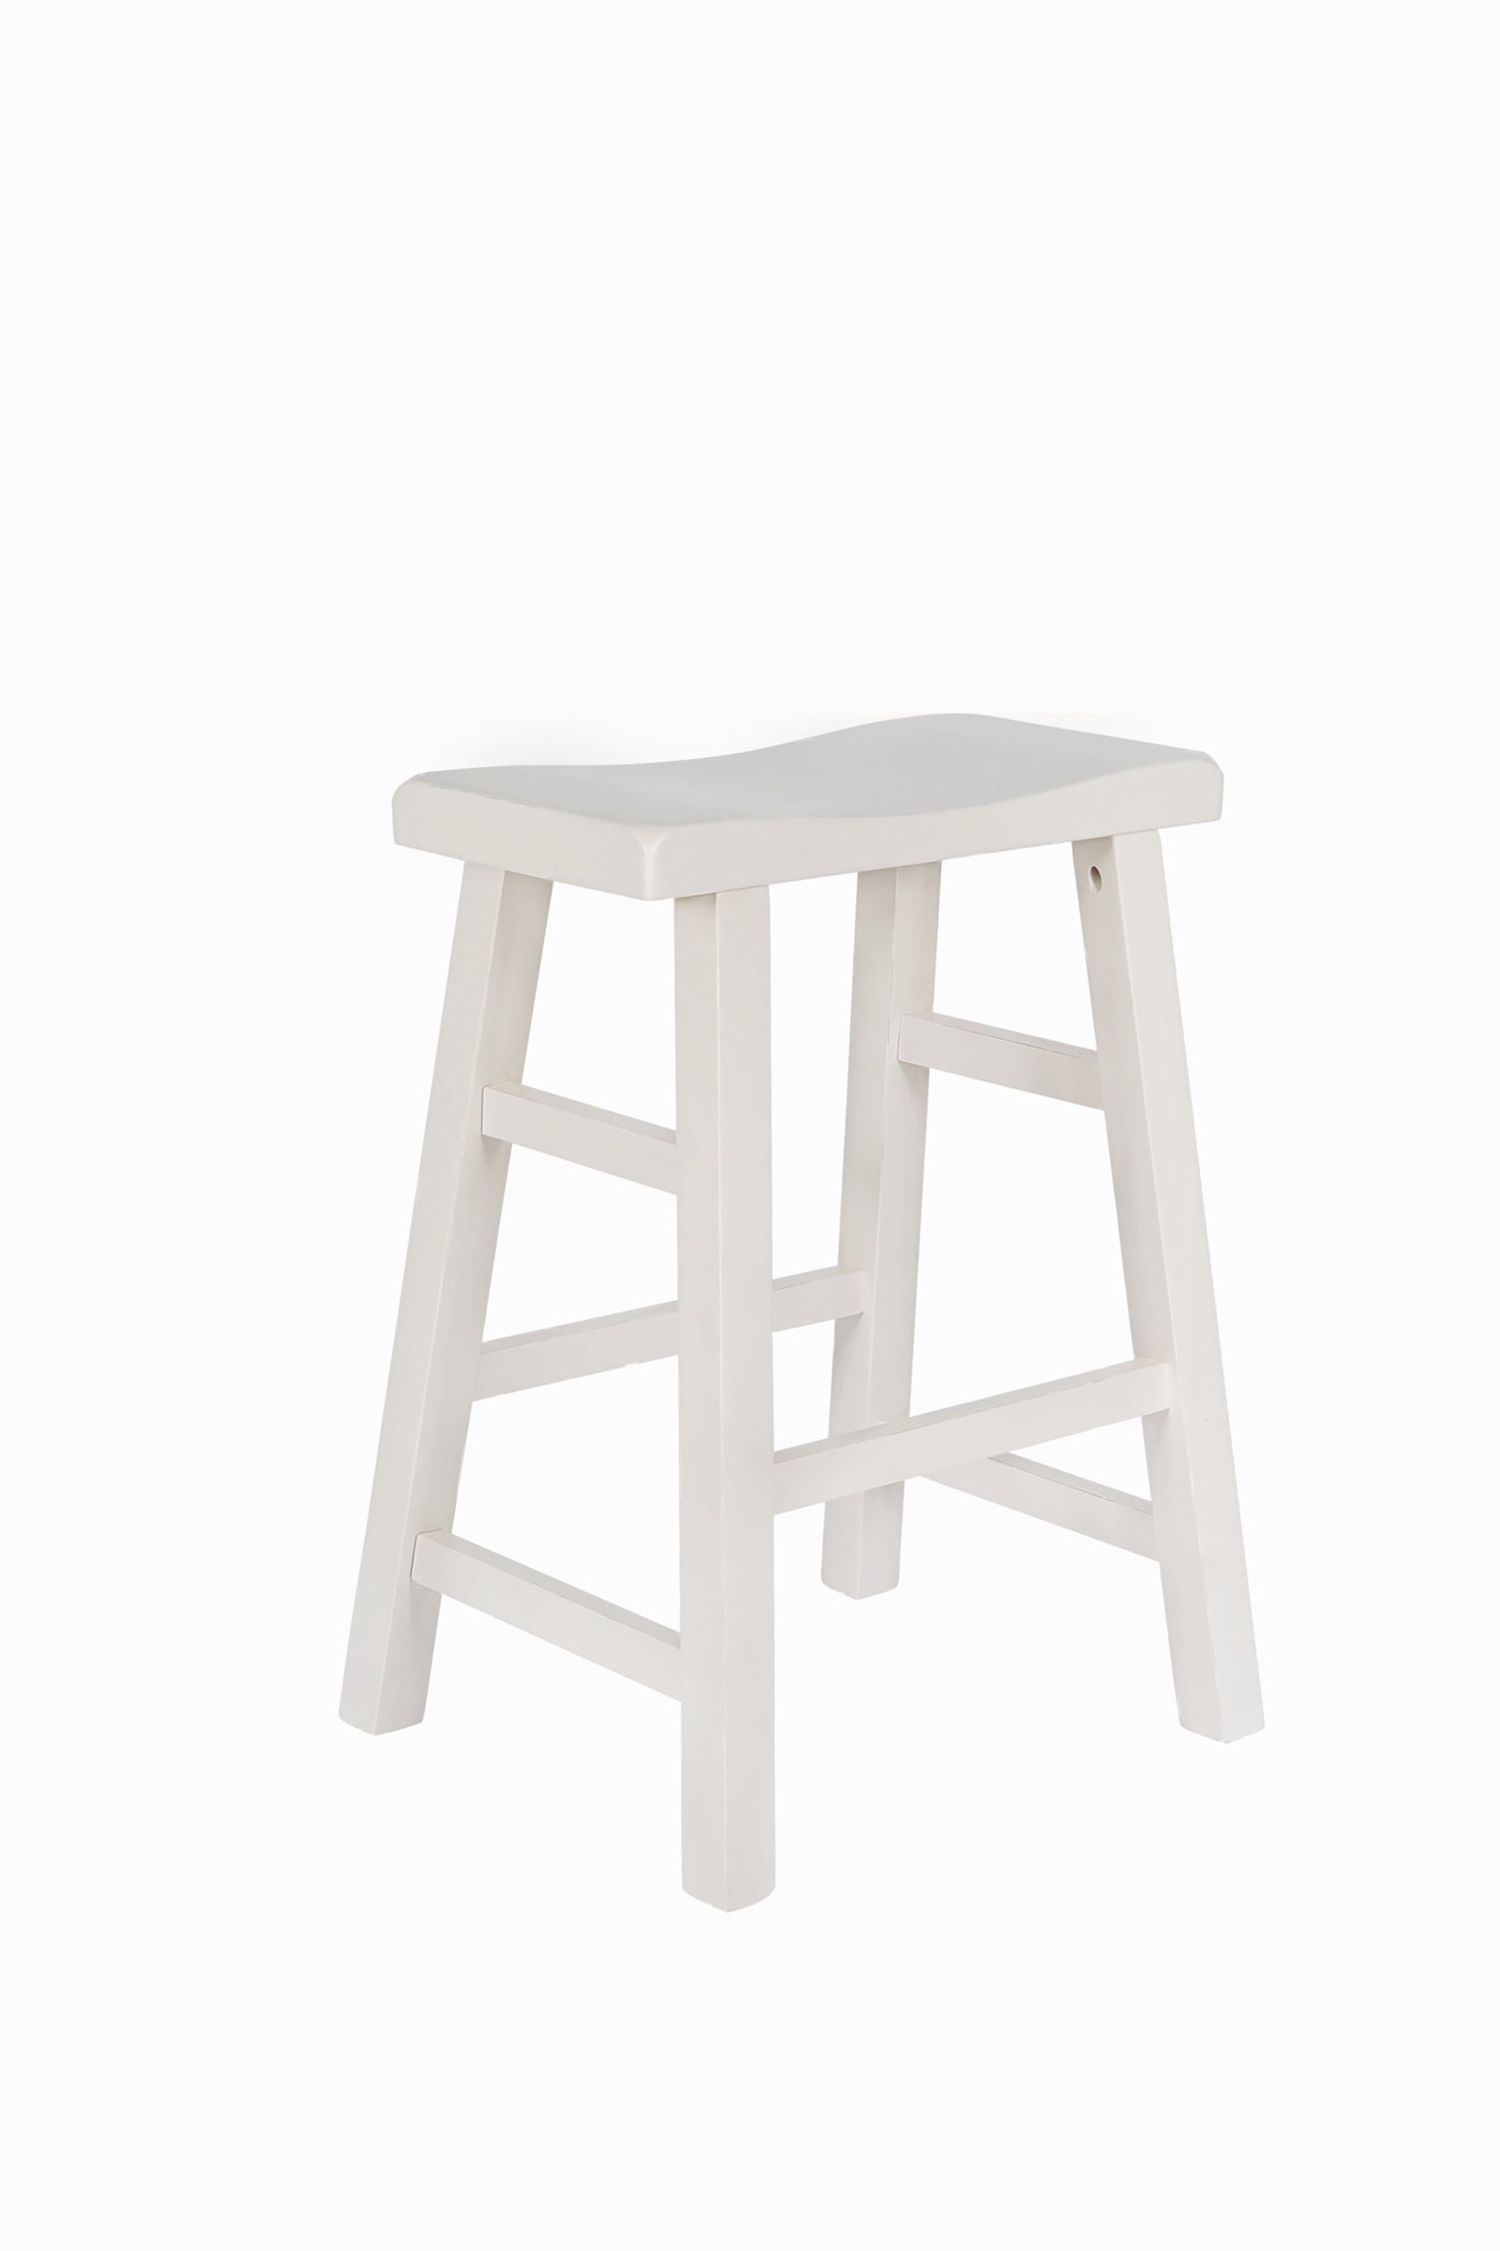 eHemco Heavy-Duty Solid Wood Saddle Seat Kitchen Counter Height Barstools, 24 Inches, White, Set of 3 - image 3 of 6